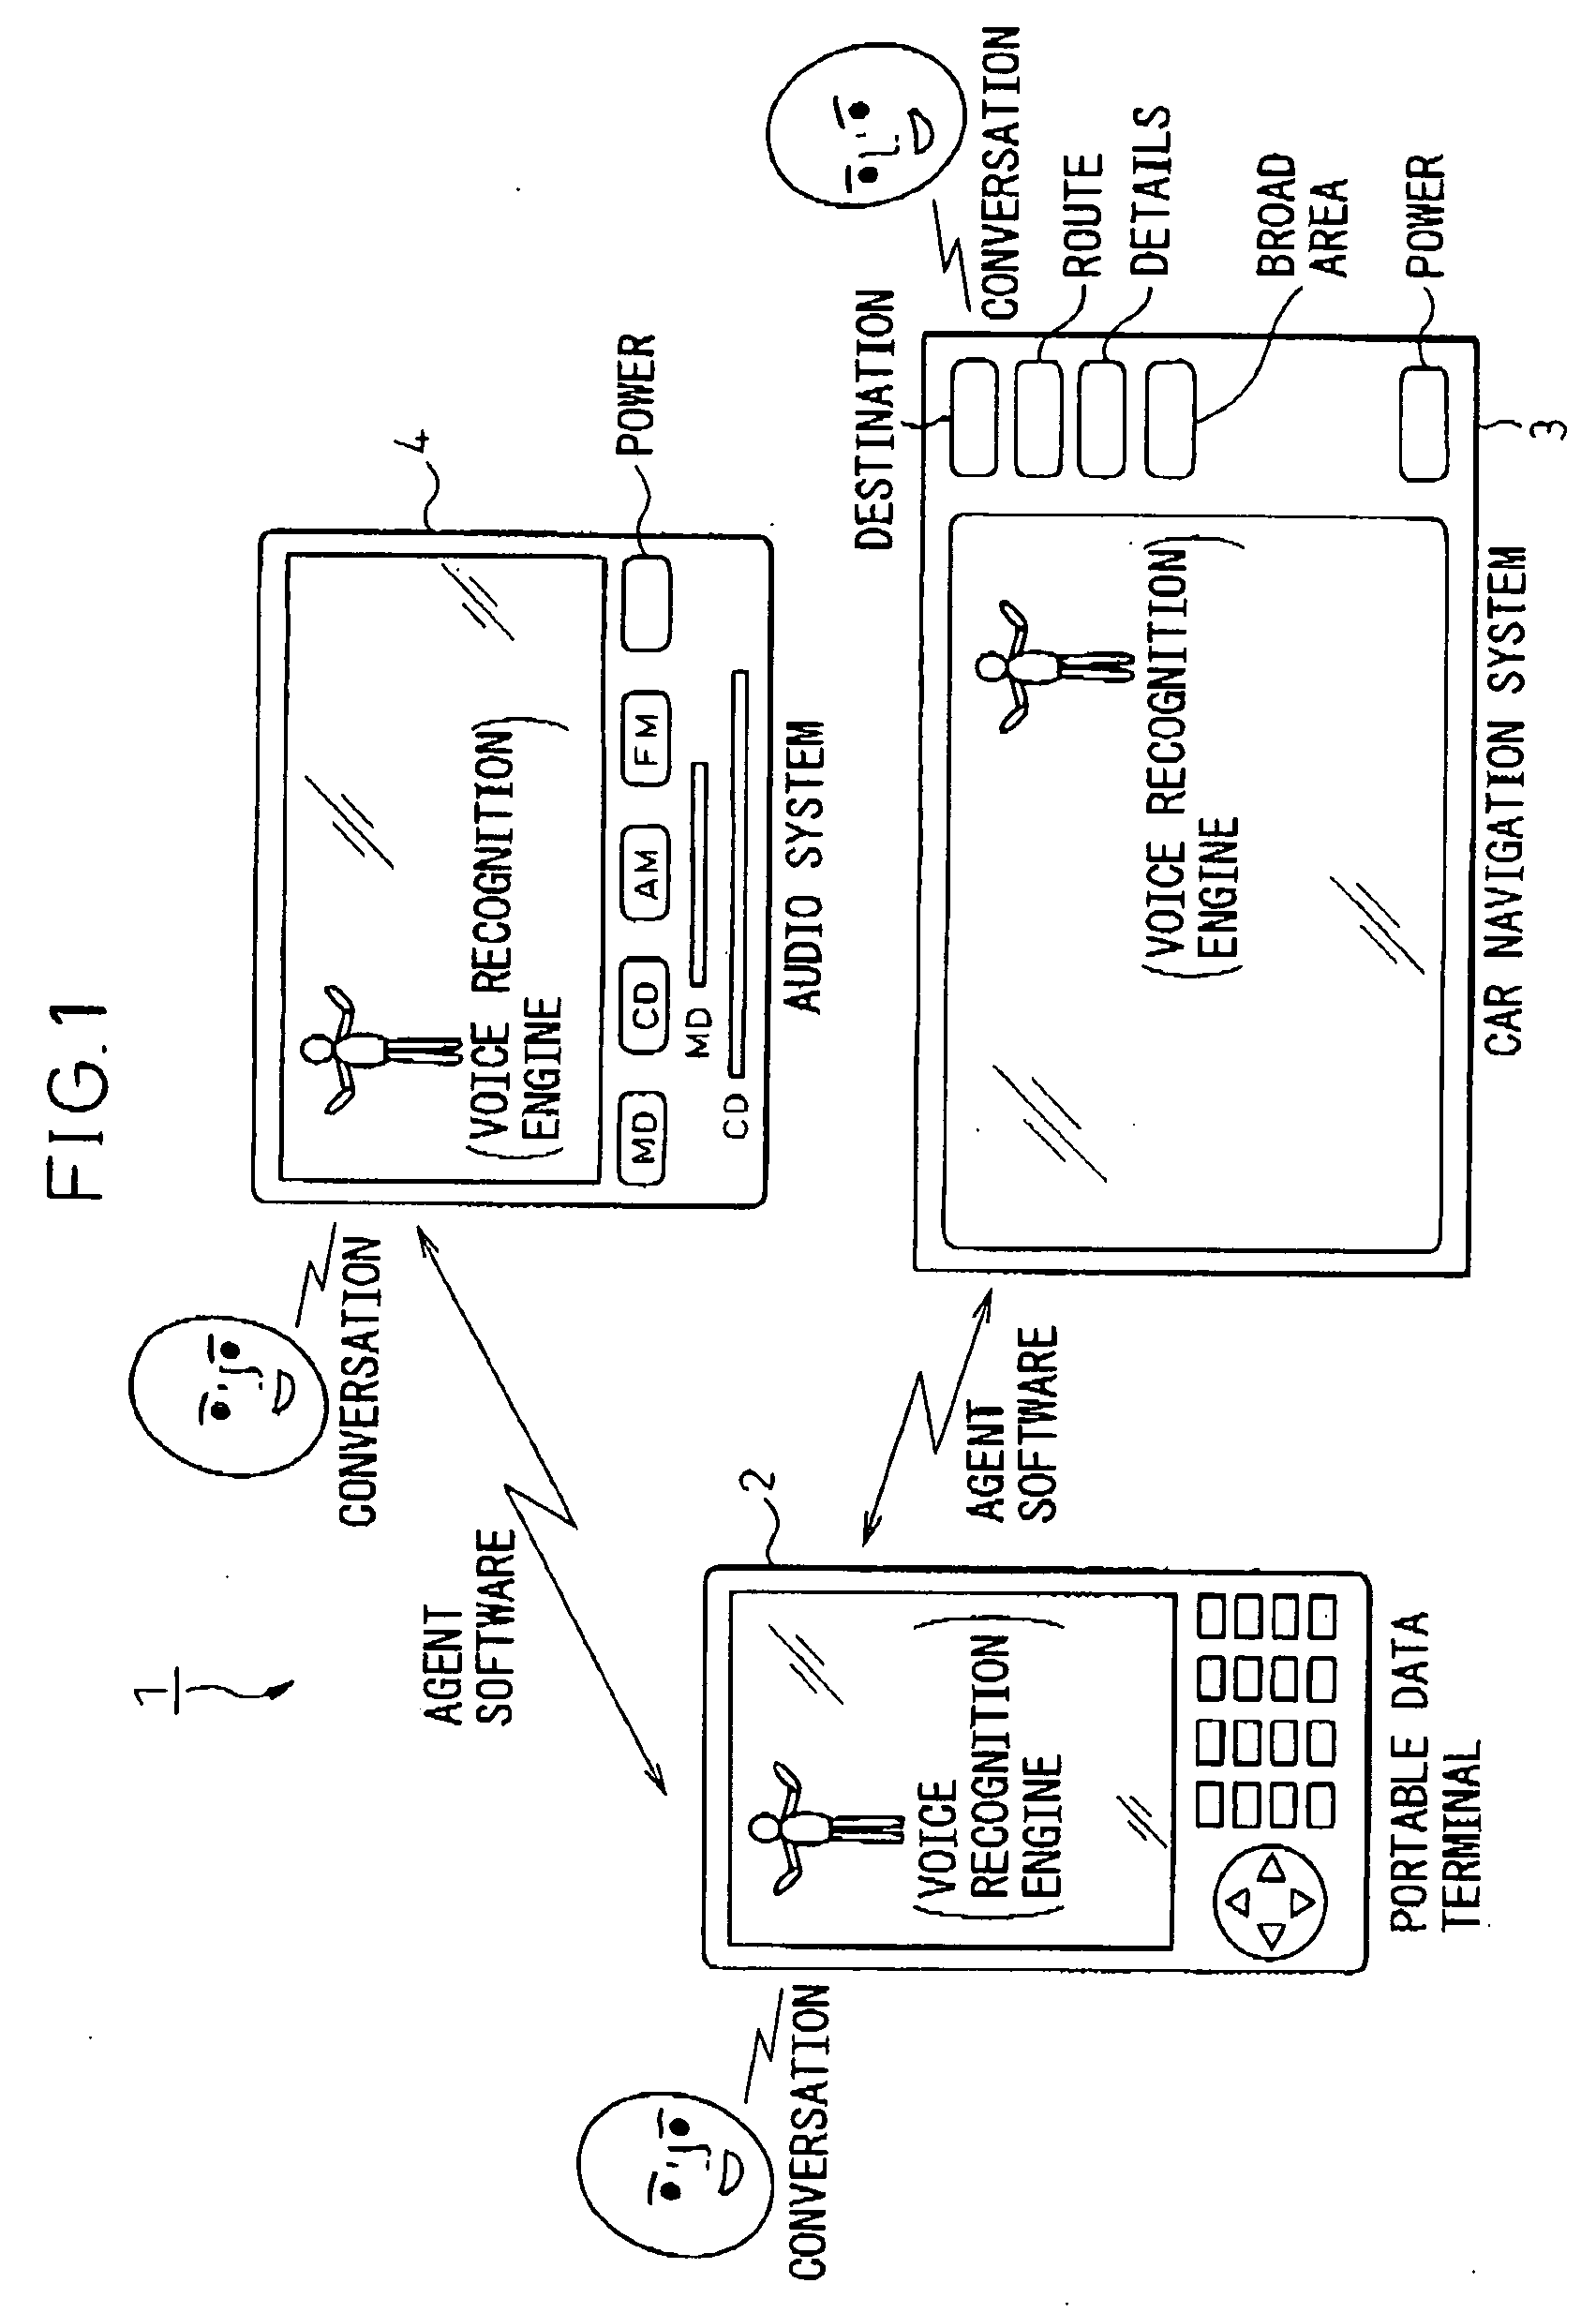 System for operating electronic device using animated character display and such electronic device